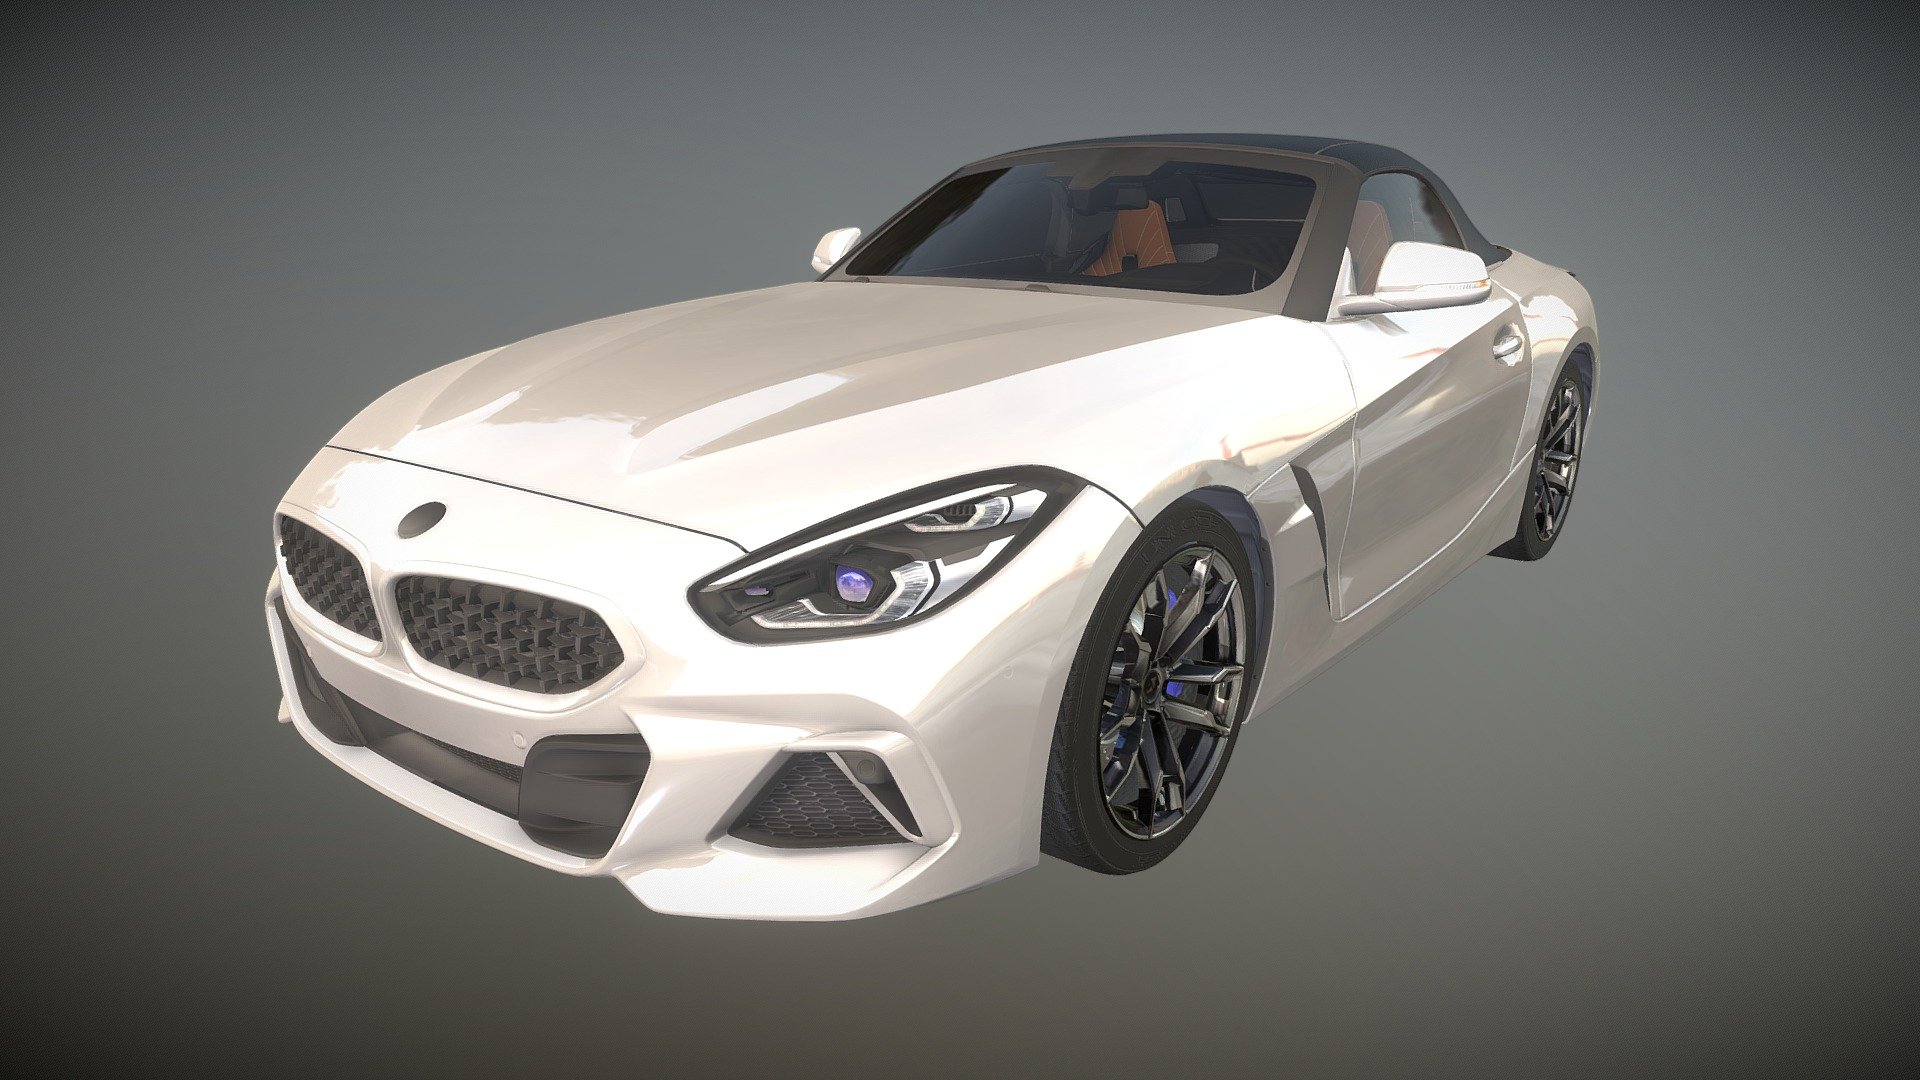 Subscribe and like my videos! - YouTube

https://youtu.be/rlPLwnqZ6gY

Sports car model for game.


 - Unlock sports car #06 - 3D model by UnlockGameAssets 3d model